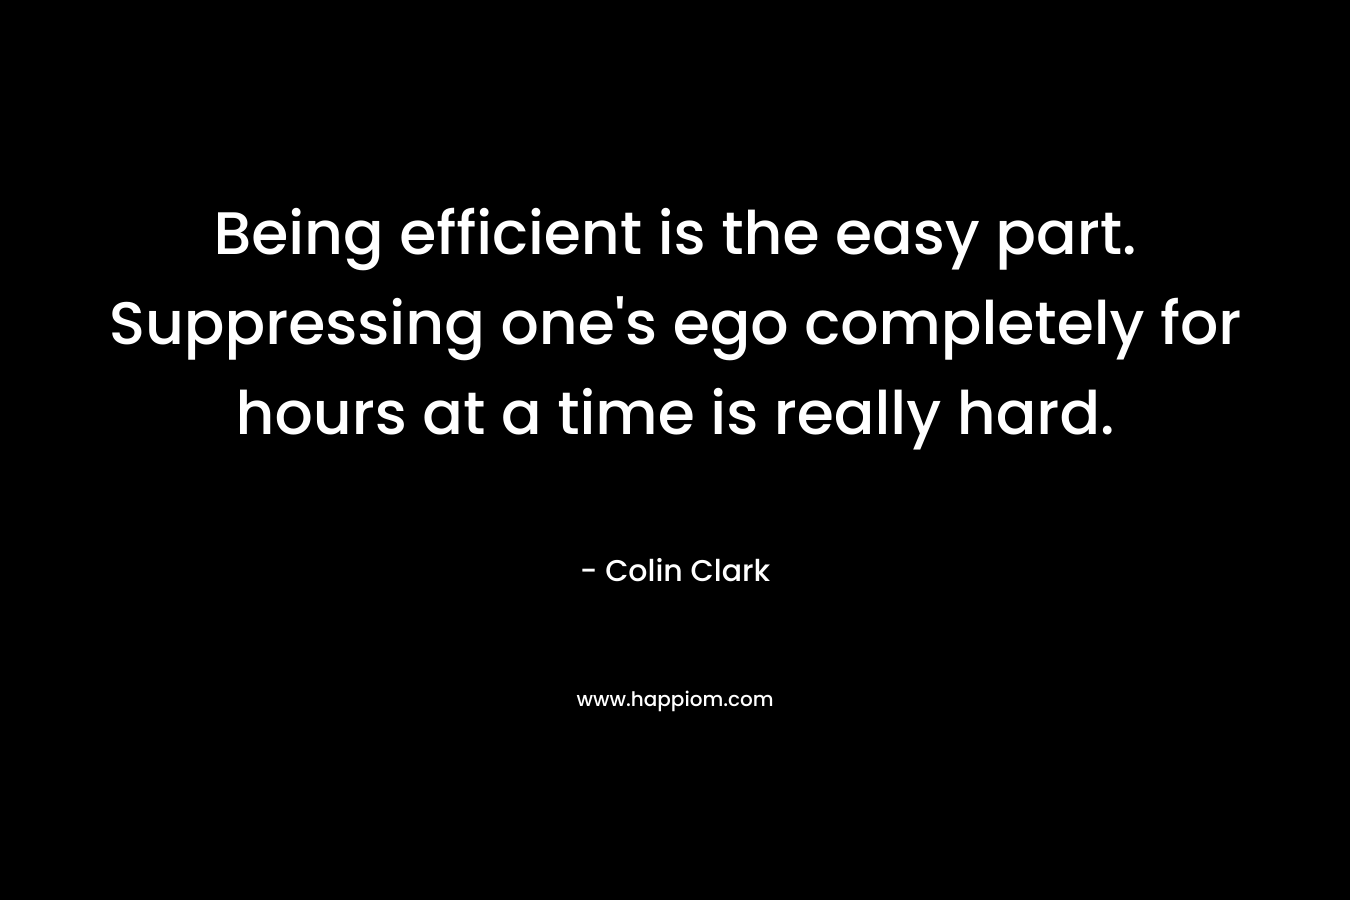 Being efficient is the easy part. Suppressing one’s ego completely for hours at a time is really hard. – Colin Clark